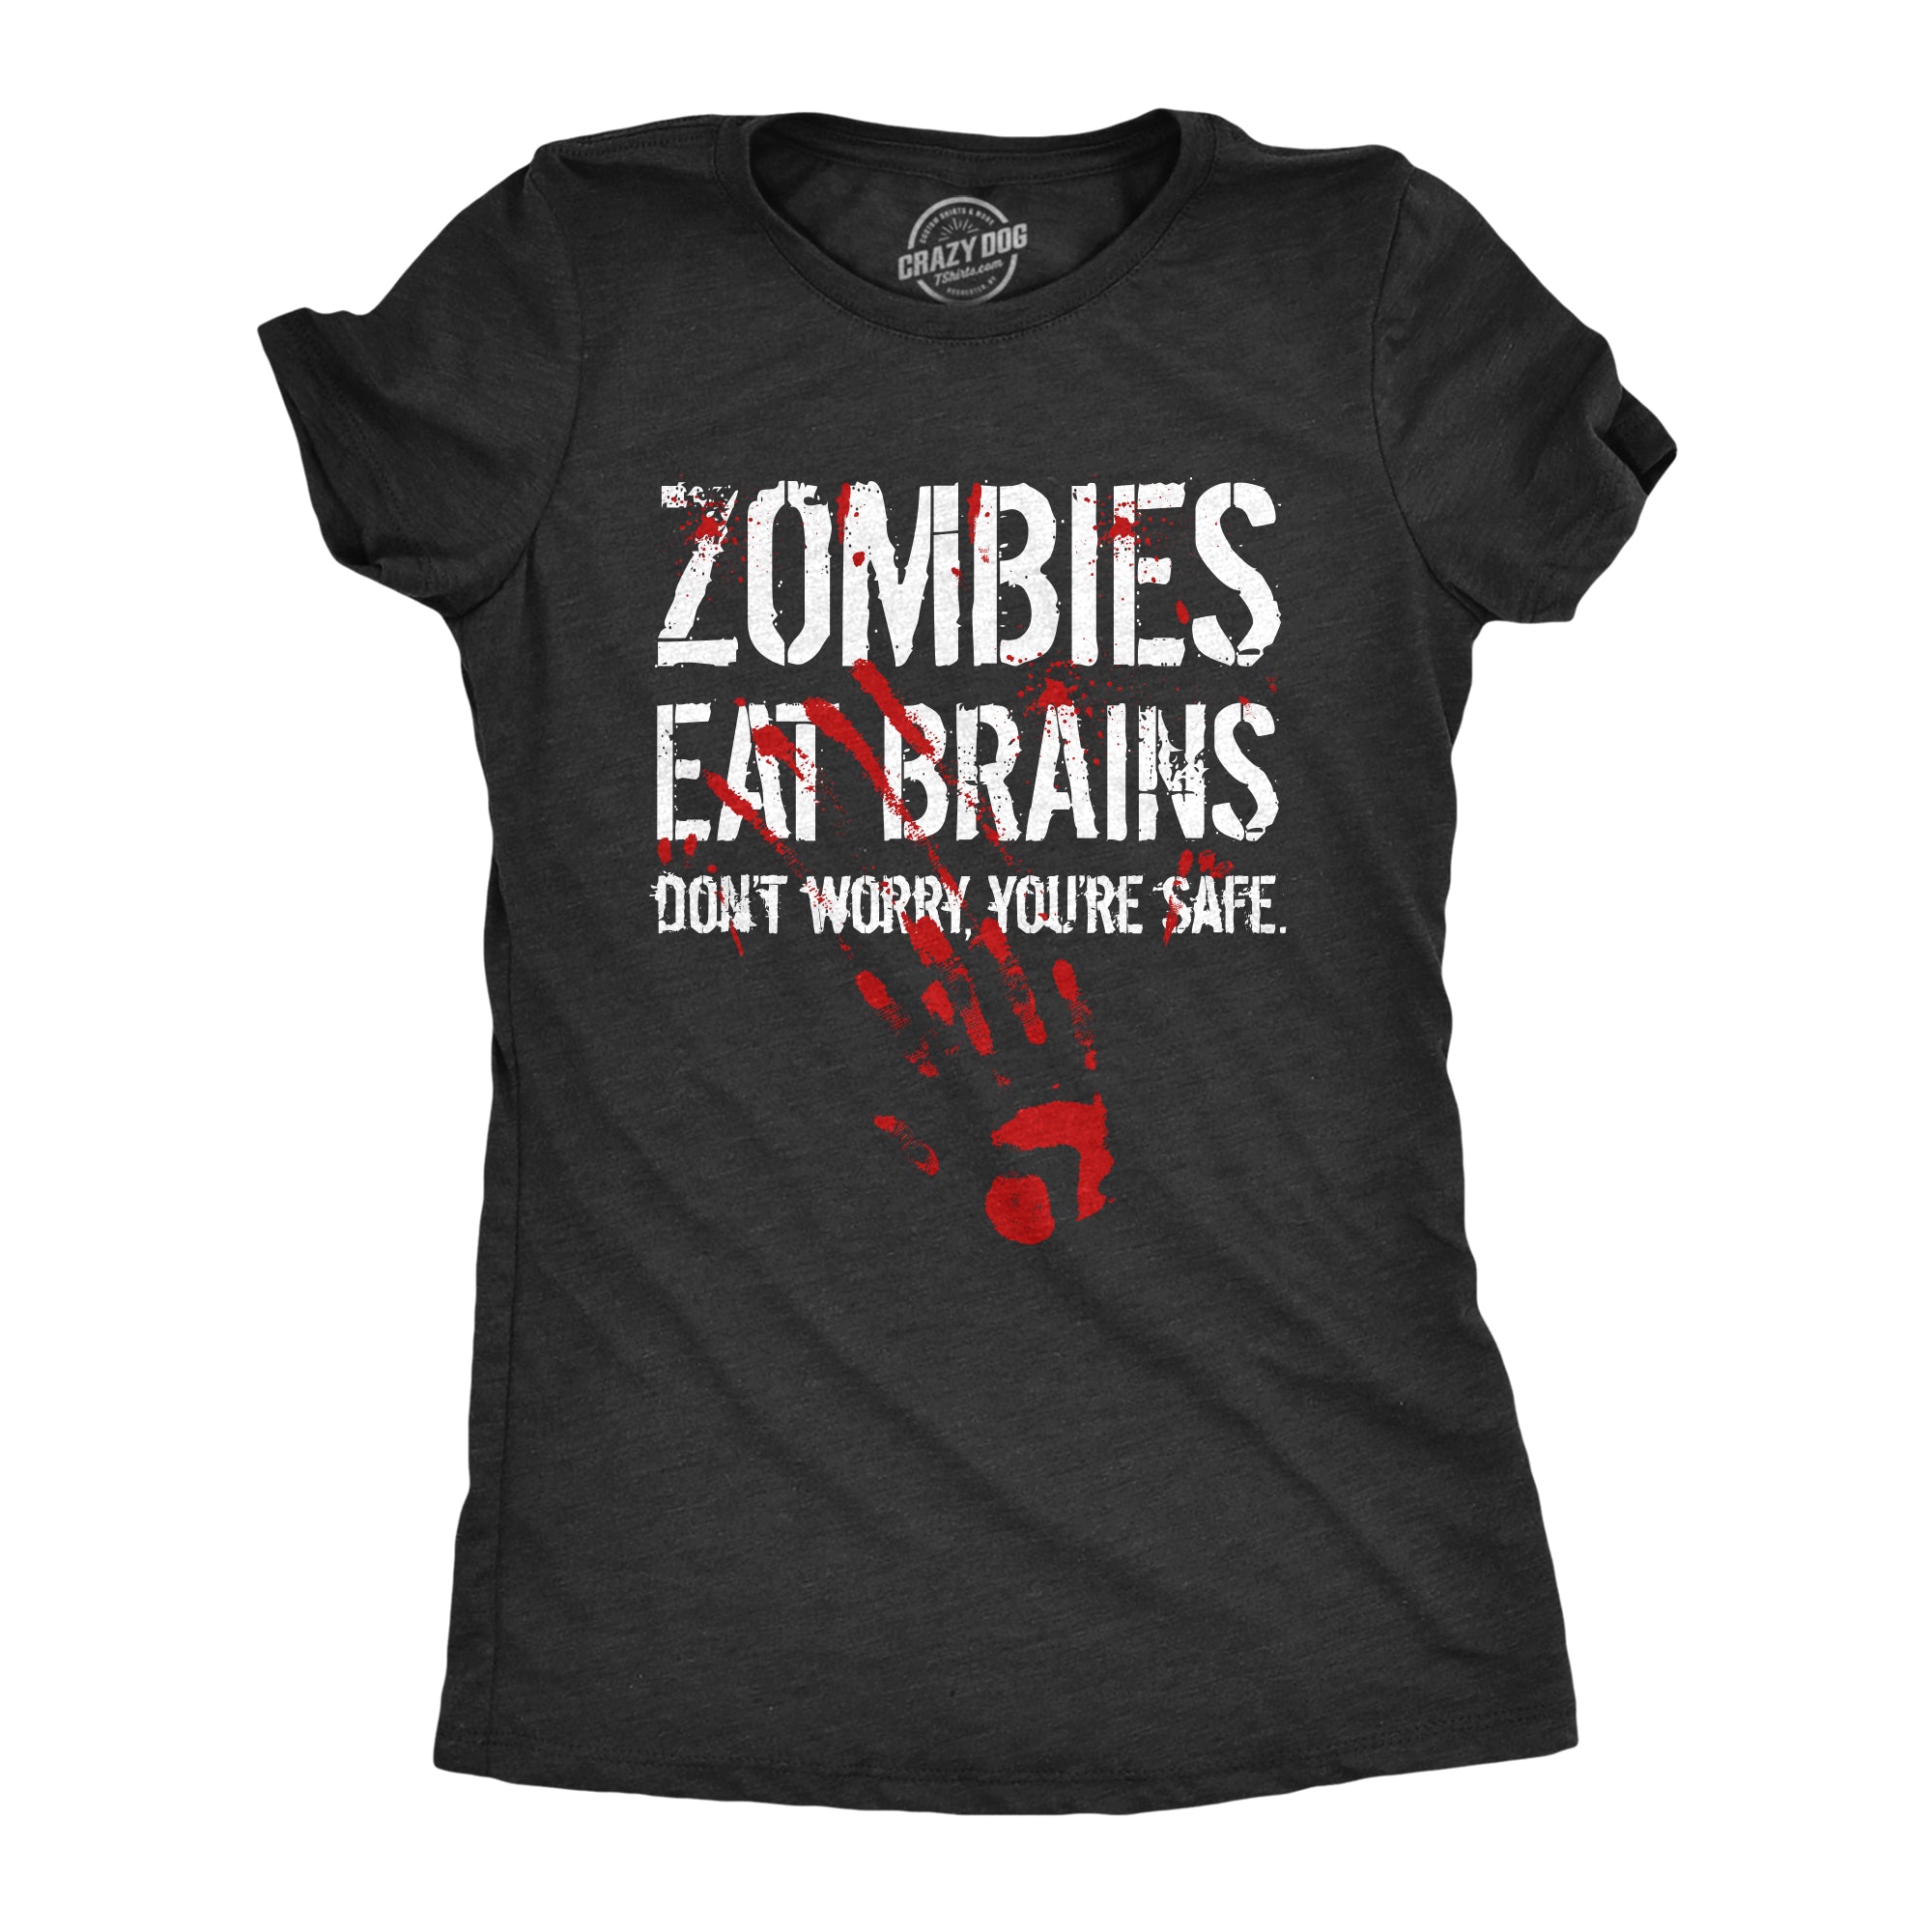 Funny Heather Black Zombies Eat Brains Don't Worry You're Safe Womens T Shirt Nerdy Halloween Zombie Sarcastic Tee